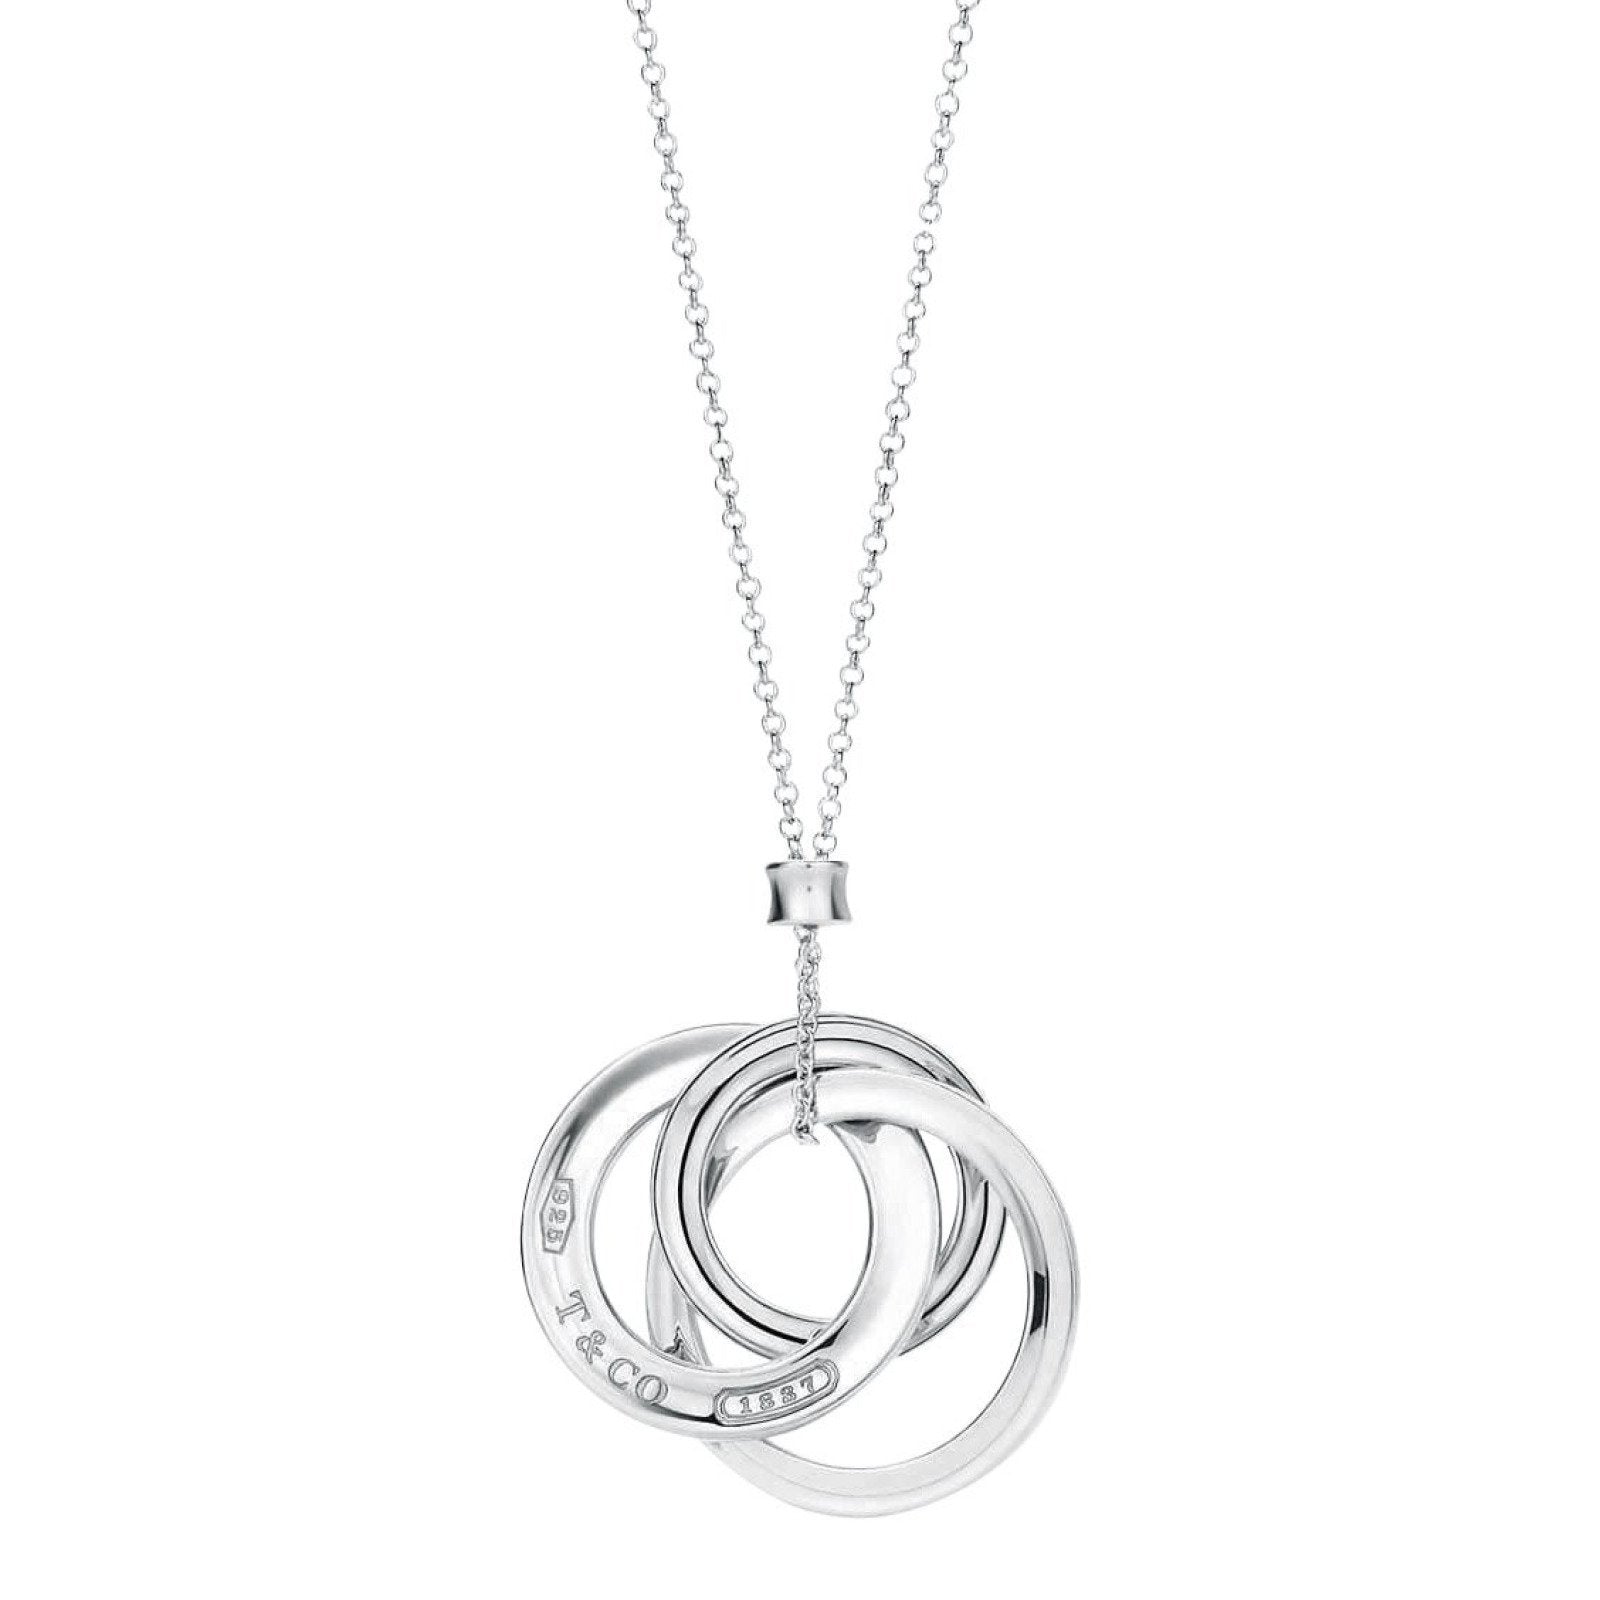 Tiffany And Co 1837 Interlocking Circles Pendant Necklace In Sterling S